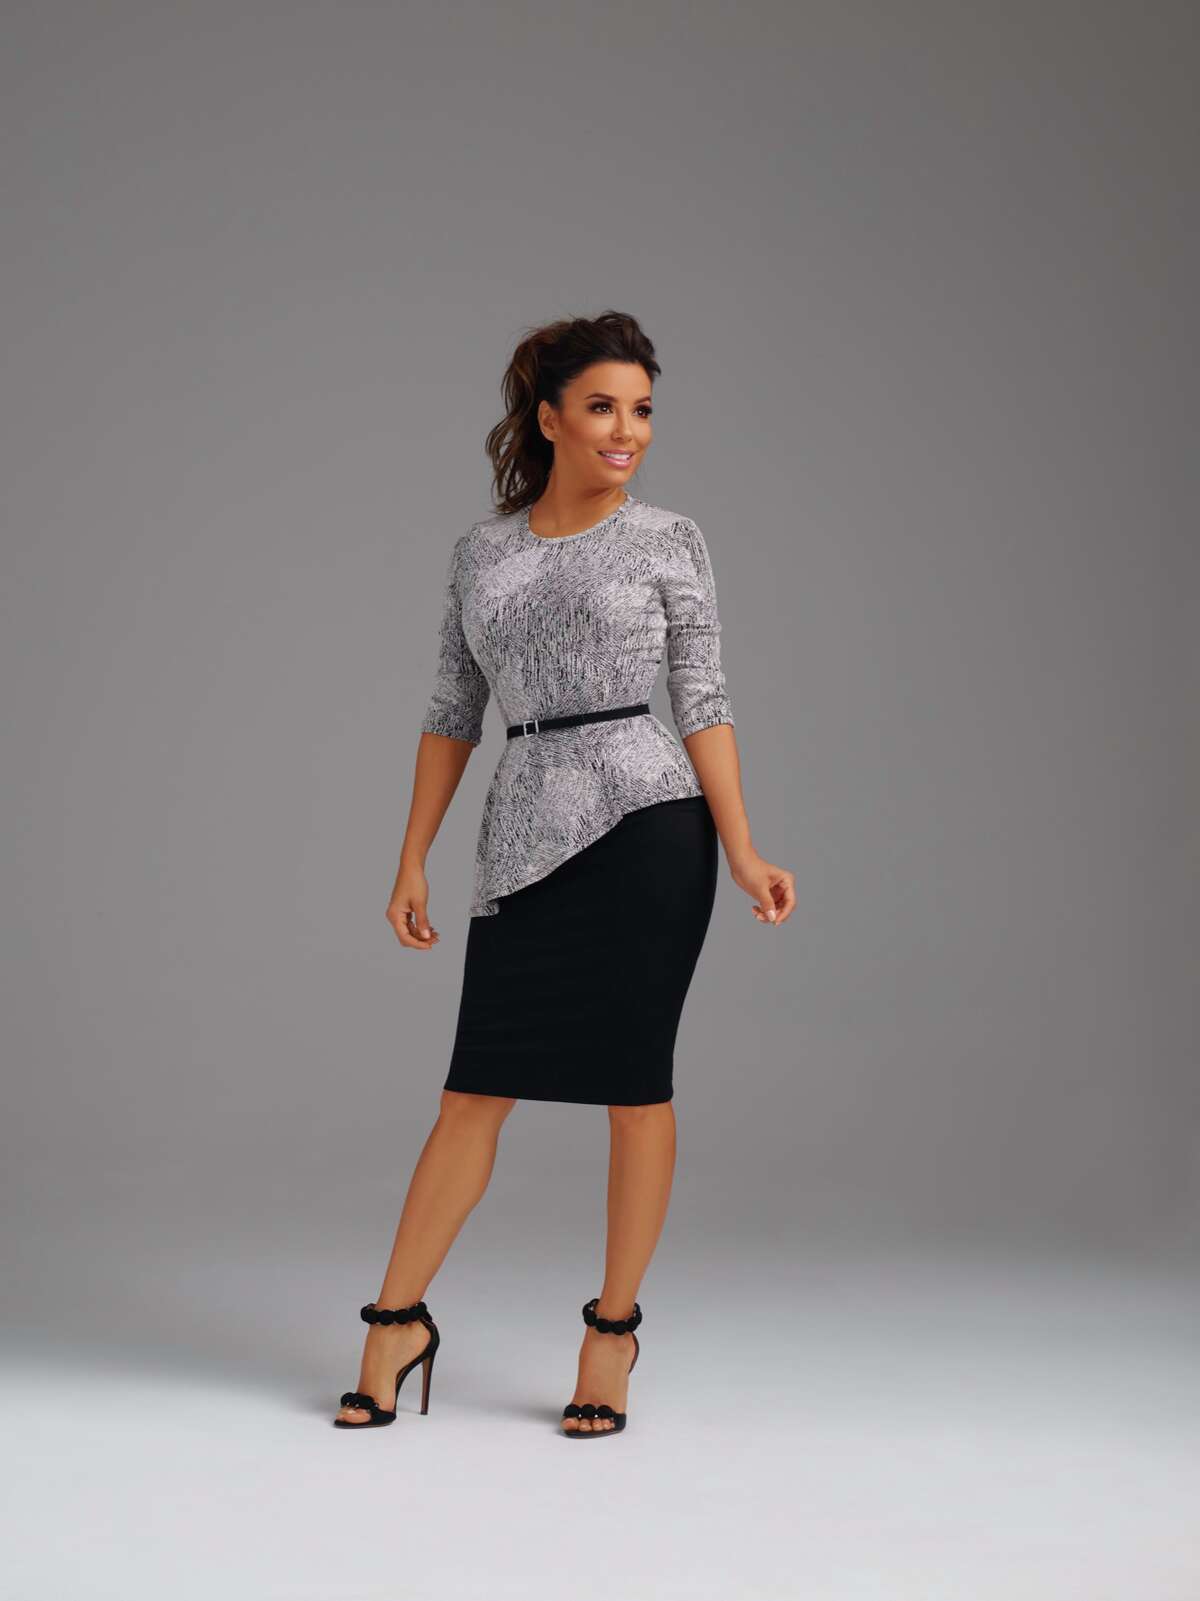 Eva Longoria modeled her clothing line found at The Limited.